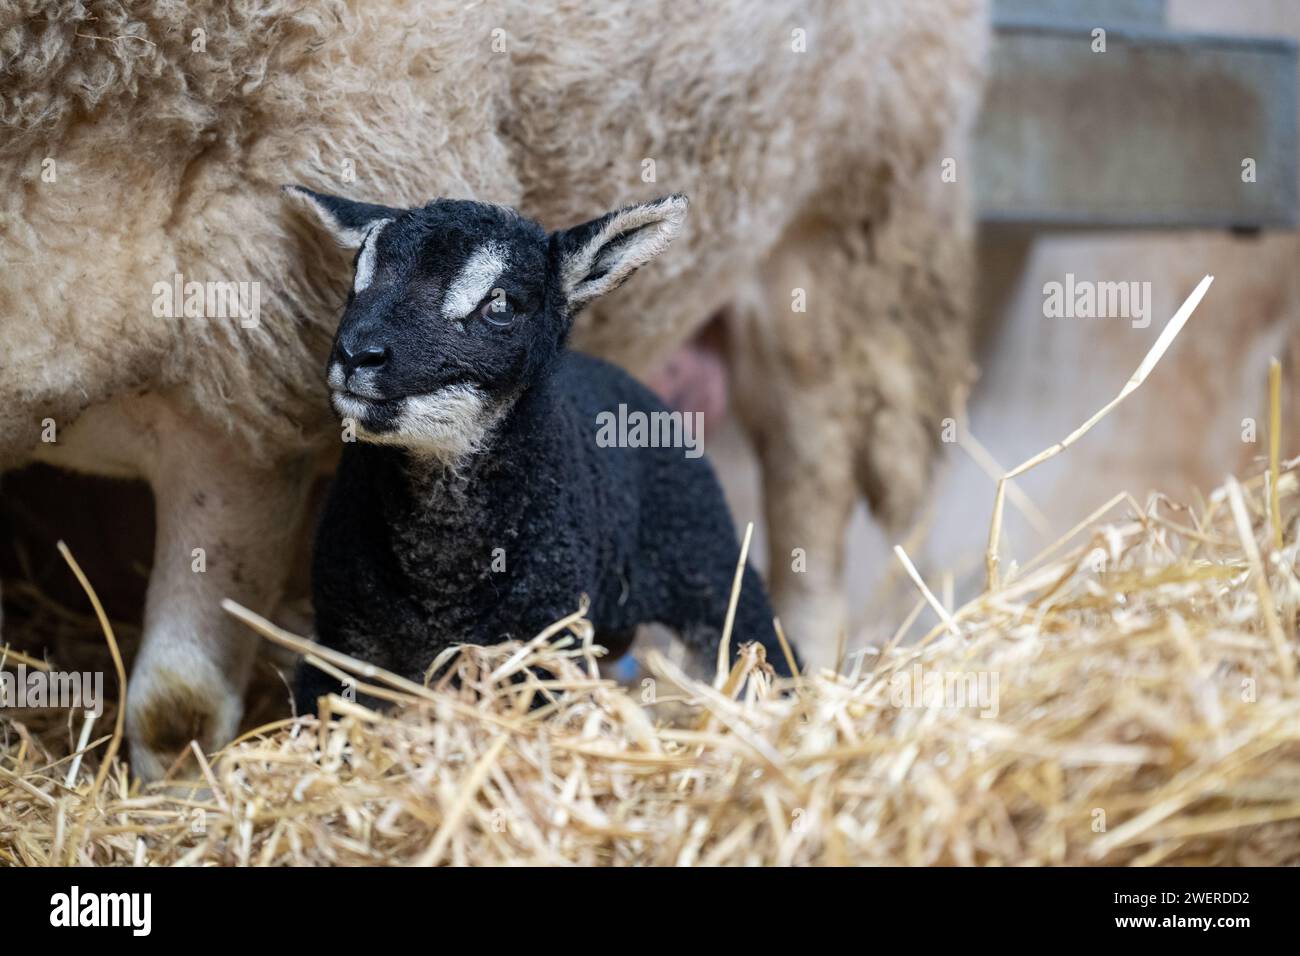 Crossbred ewe with a pedigree Badger Faced Texel at foot as a result of an embryo transplant breeding program. Cumbria, UK. Stock Photo